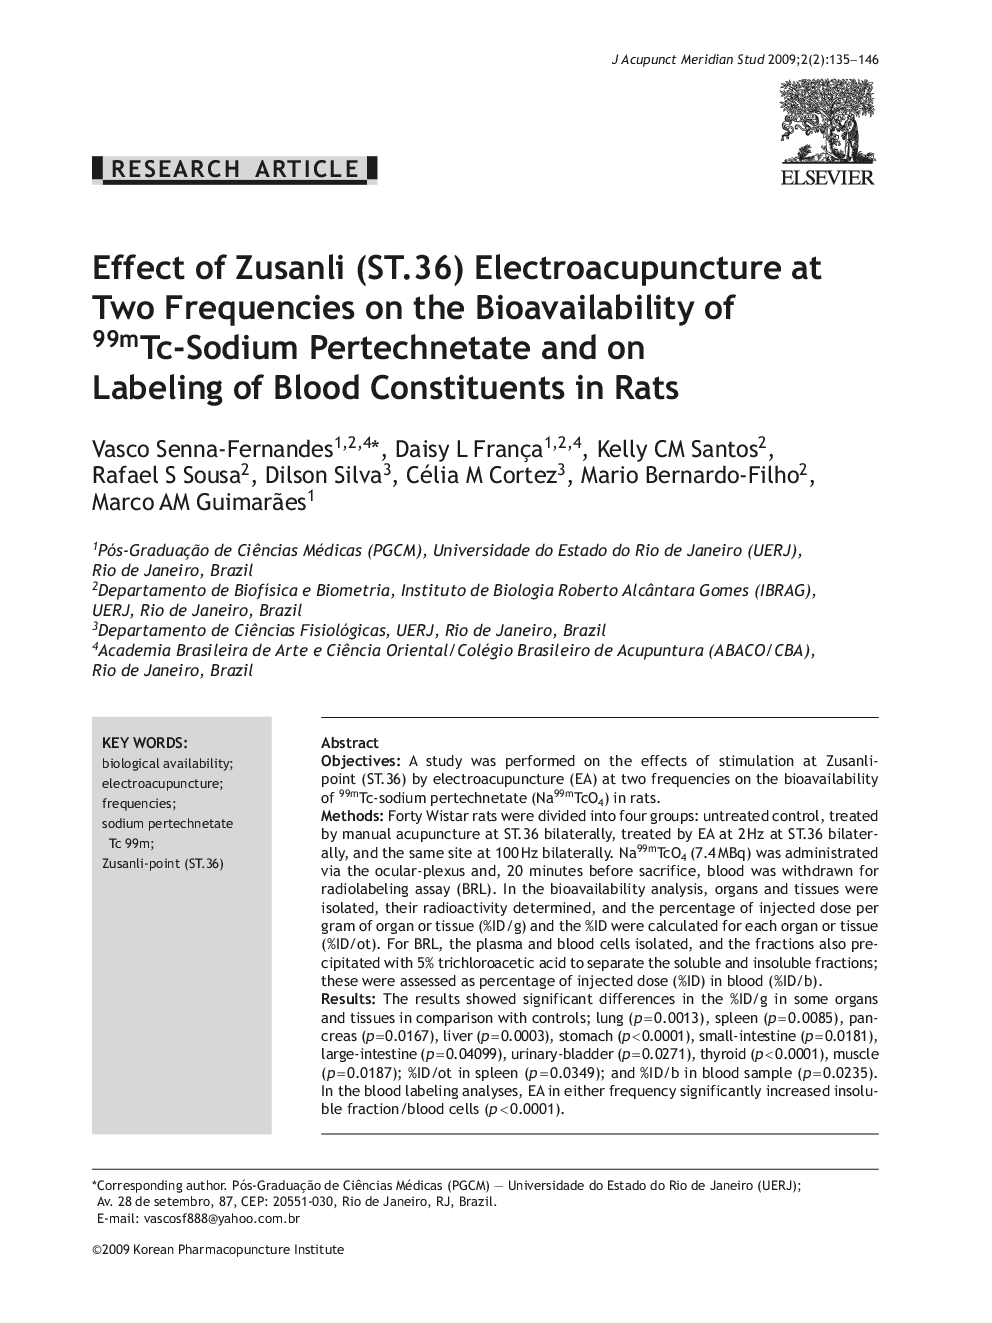 Effect of Zusanli (ST.36) Electroacupuncture at Two Frequencies on the Bioavailability of 99mTc-Sodium Pertechnetate and on Labeling of Blood Constituents in Rats